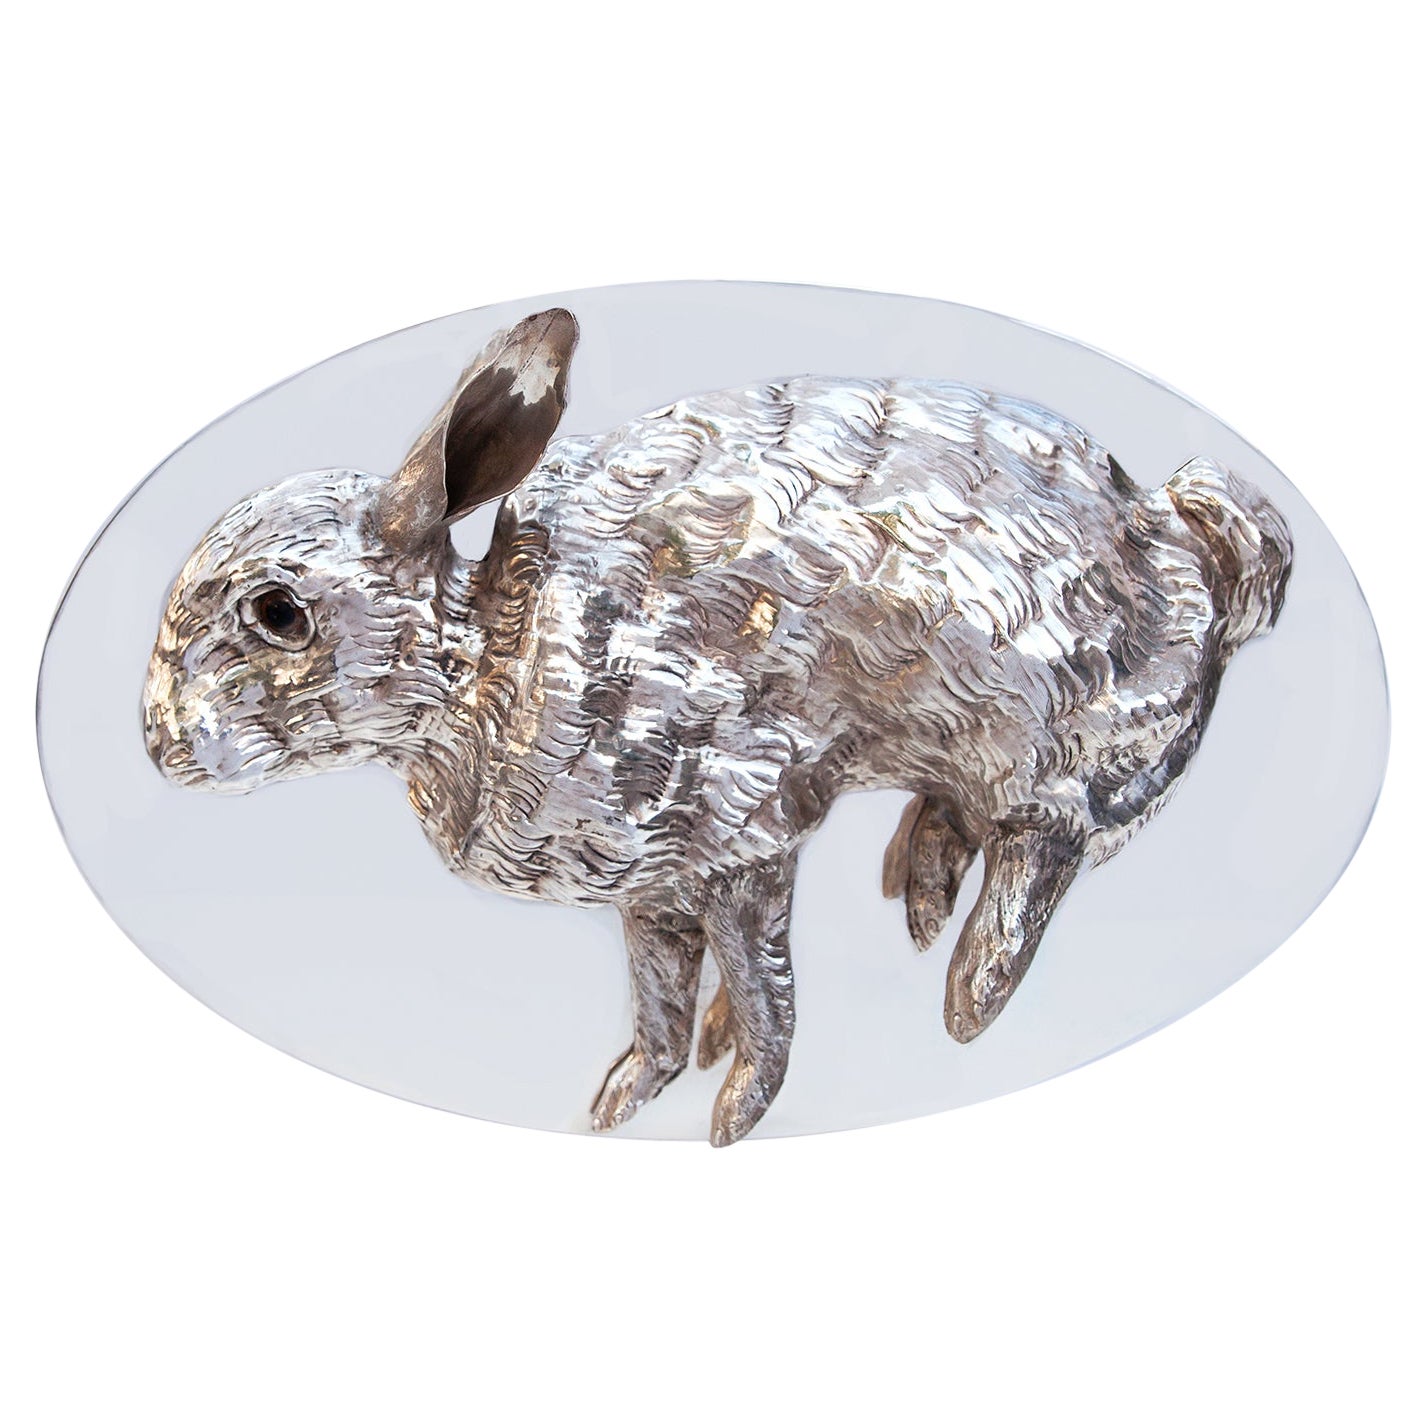 Franco Lapini Silver Plated Rabbit Serving Plate Italy 1970s For Sale